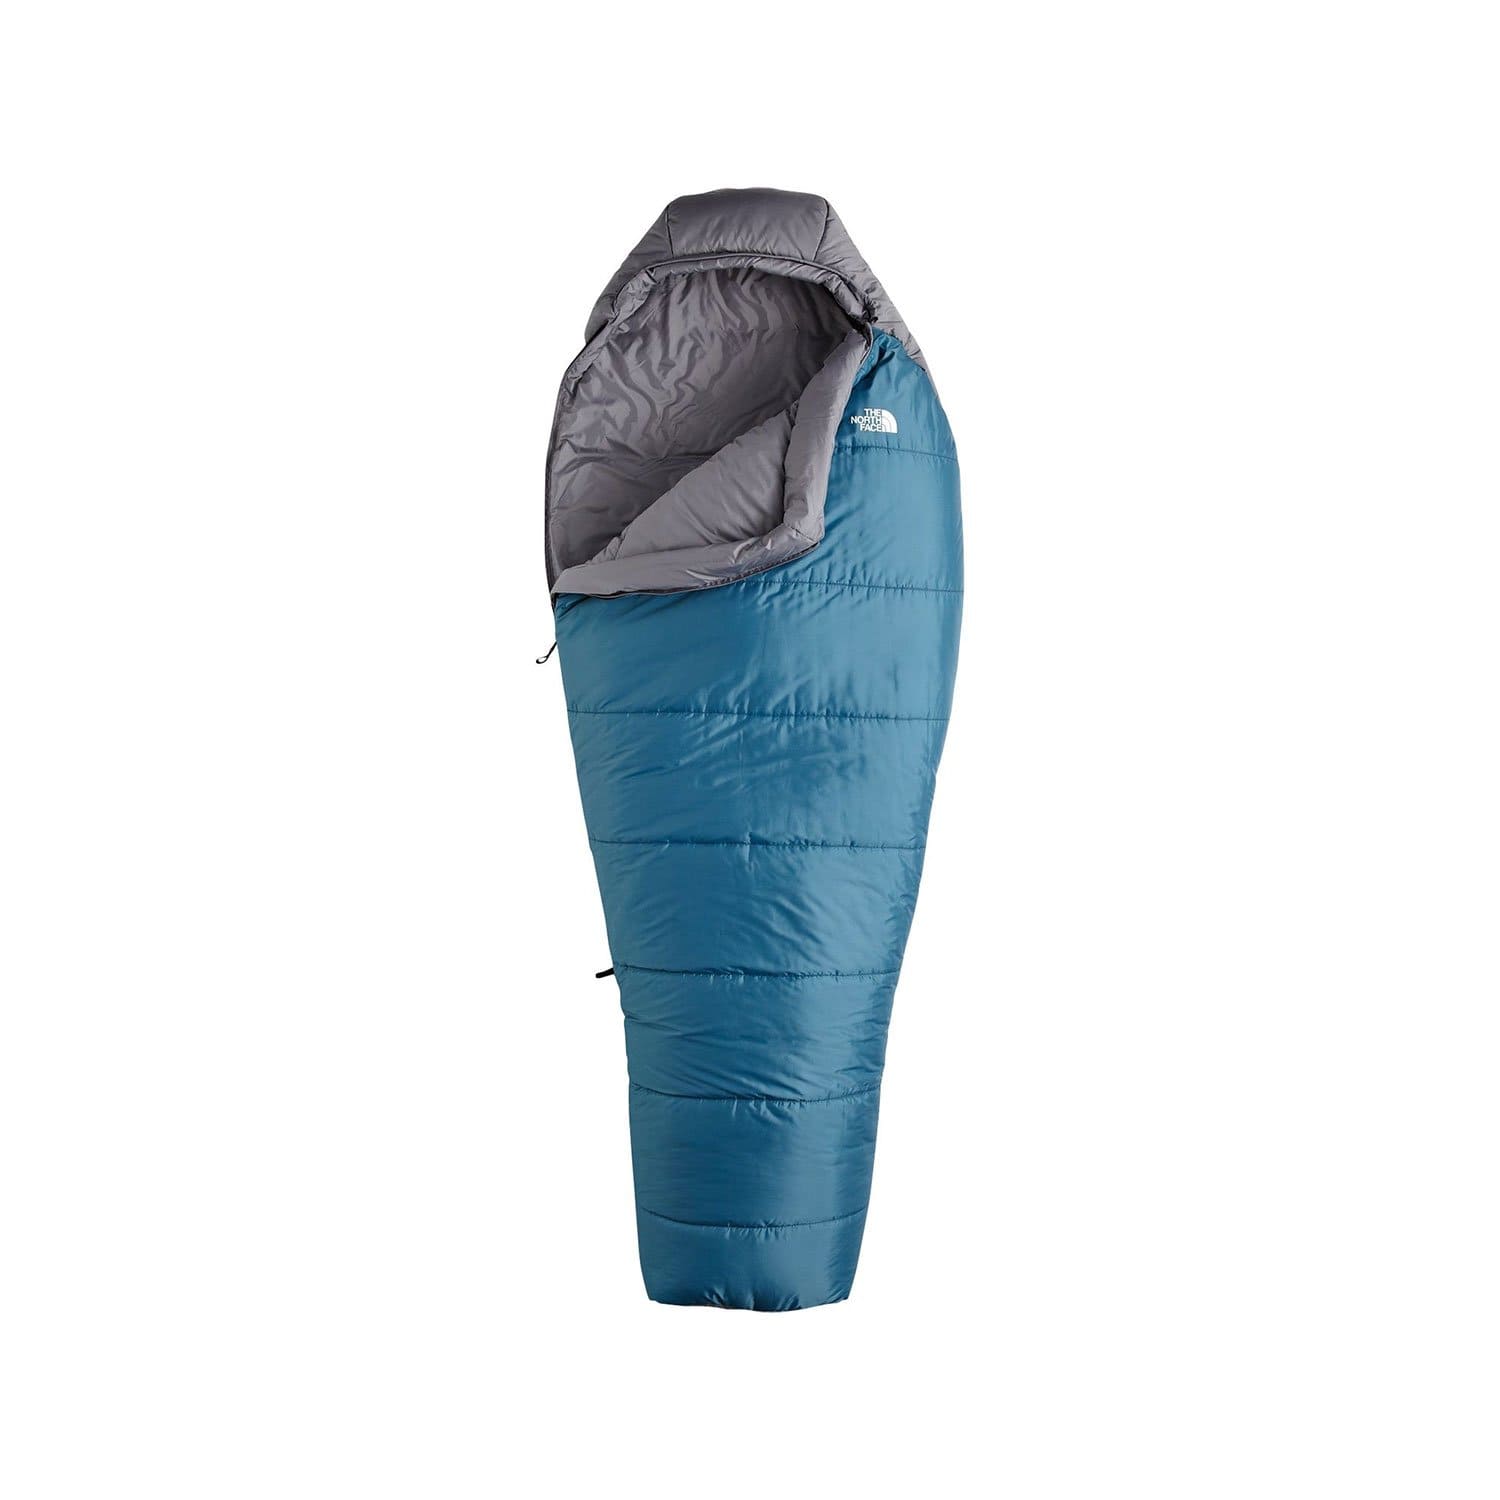 The North Face WASATCH 20/-7 Degree Sleeping Bag – Campmor